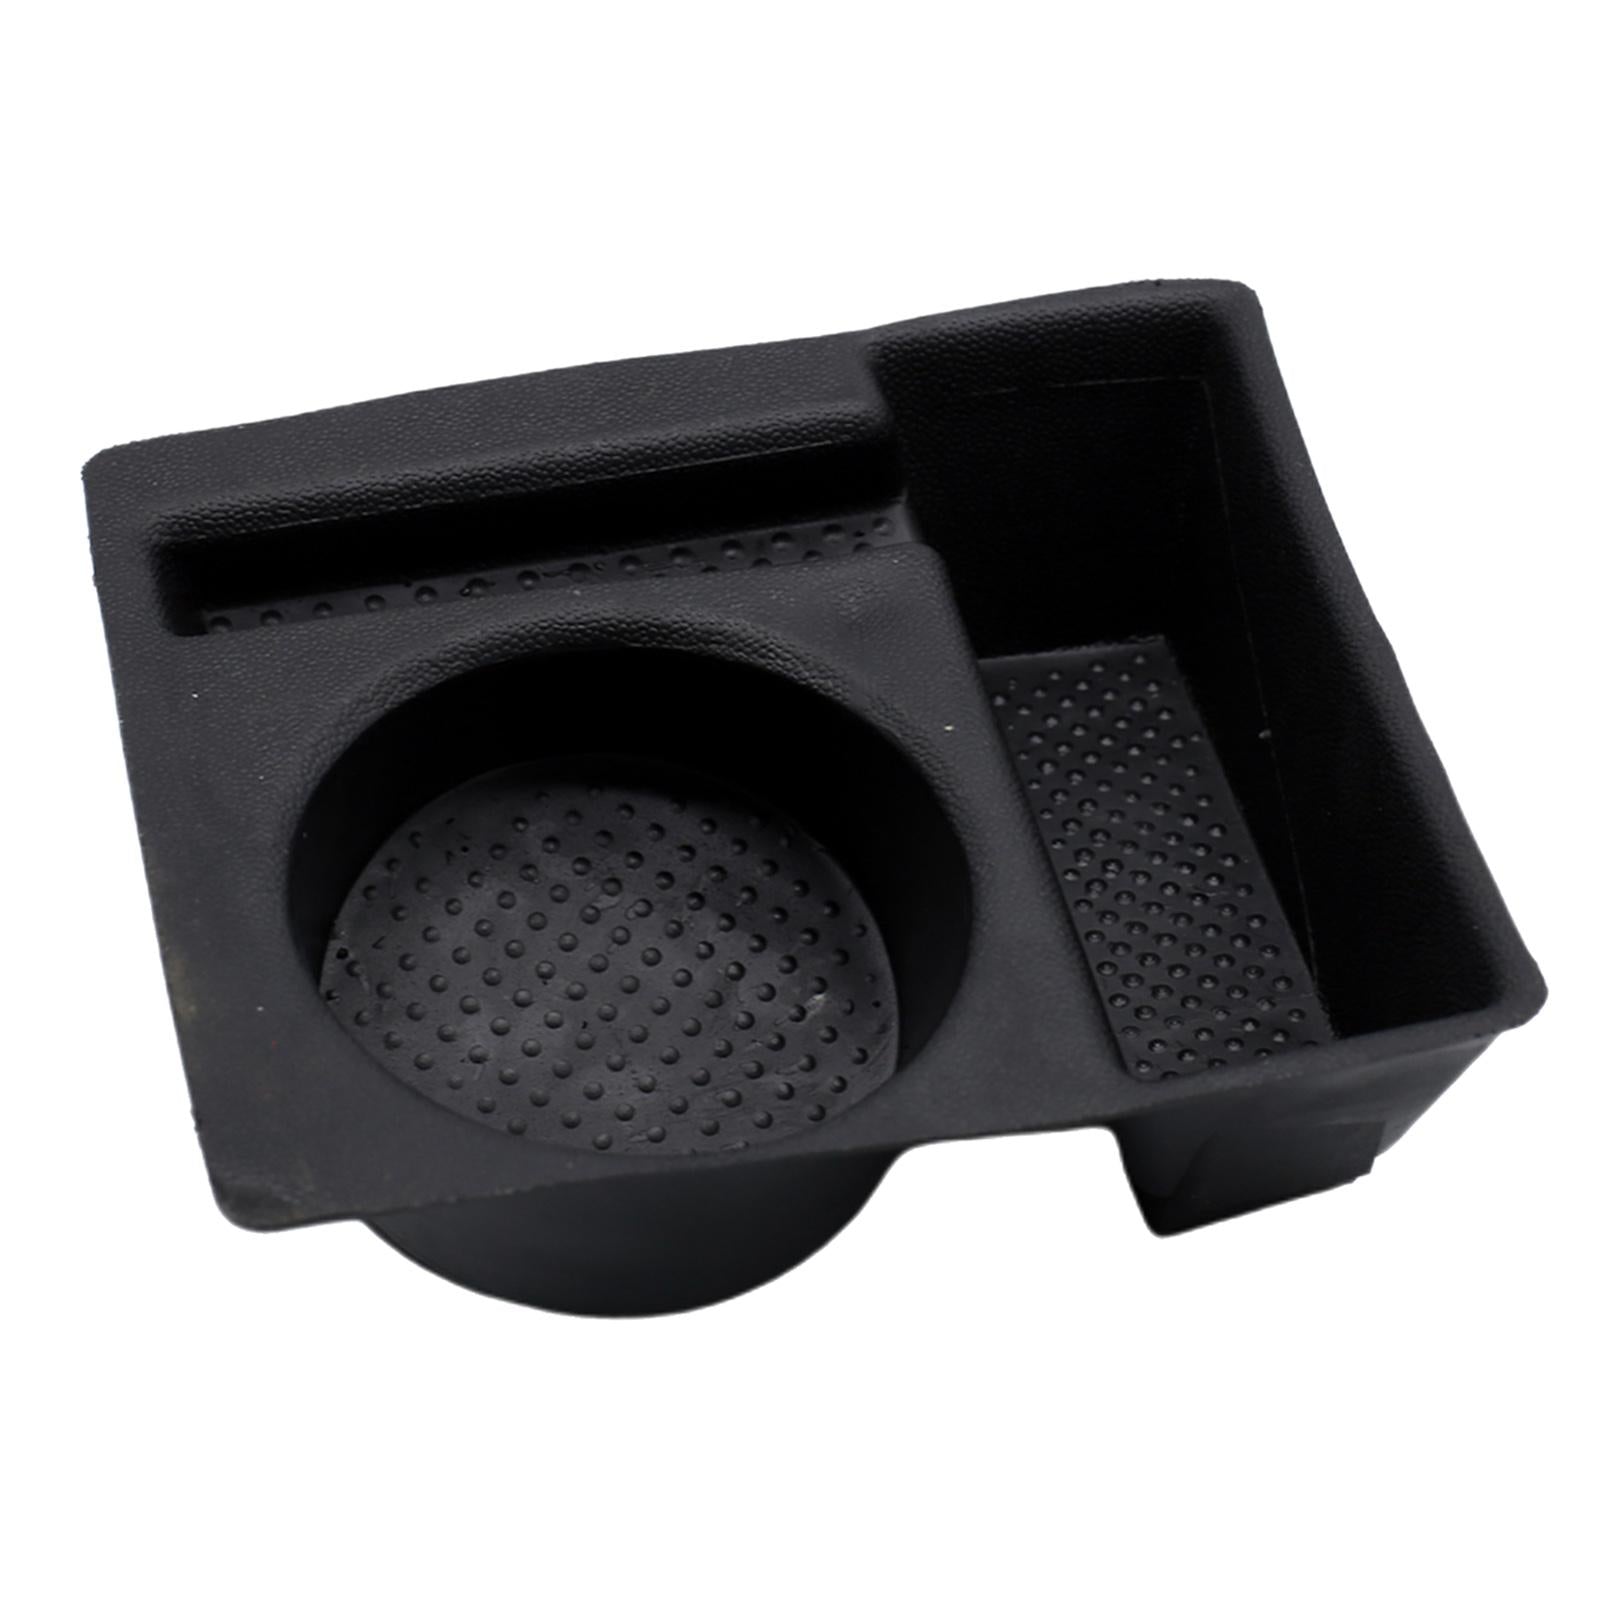 00244872 Cup Holder Water Cup Fit for Citroen DS3 Beverage Drink Black